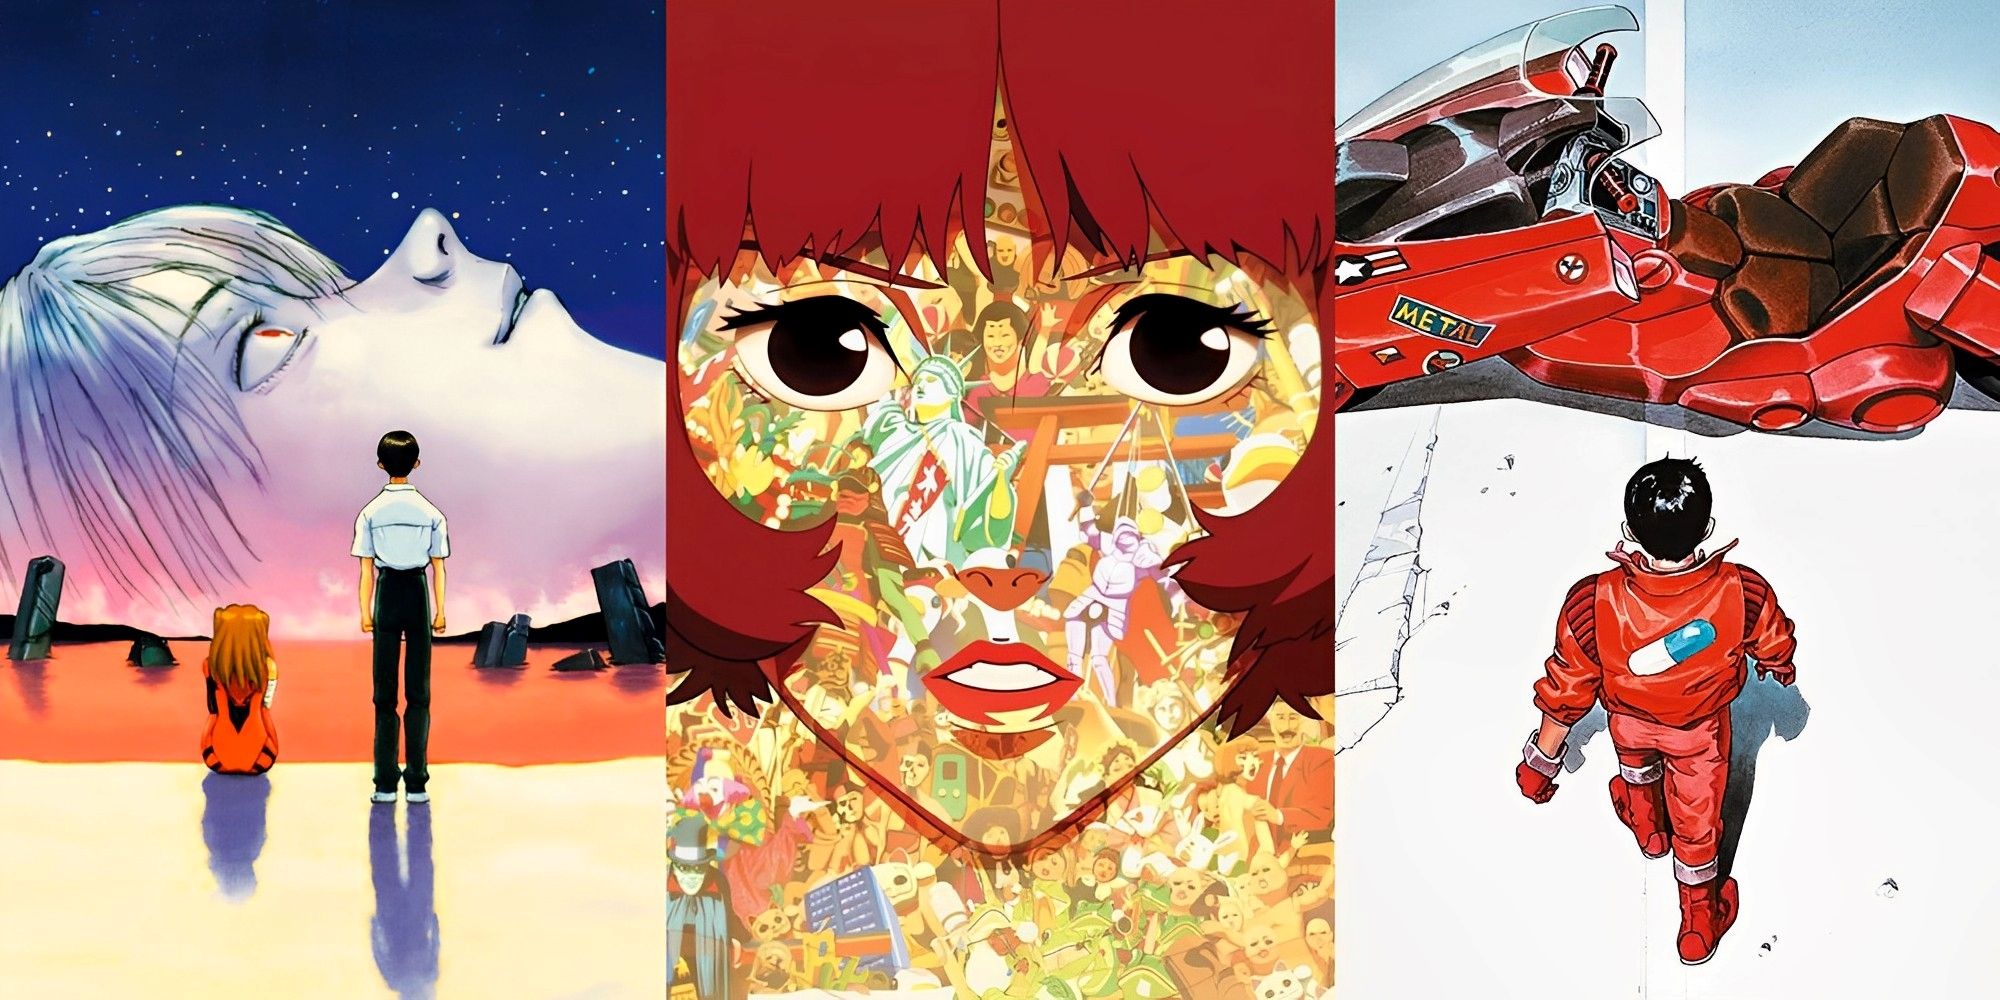 Box art from End of Evangelion, Paprika, and Akira